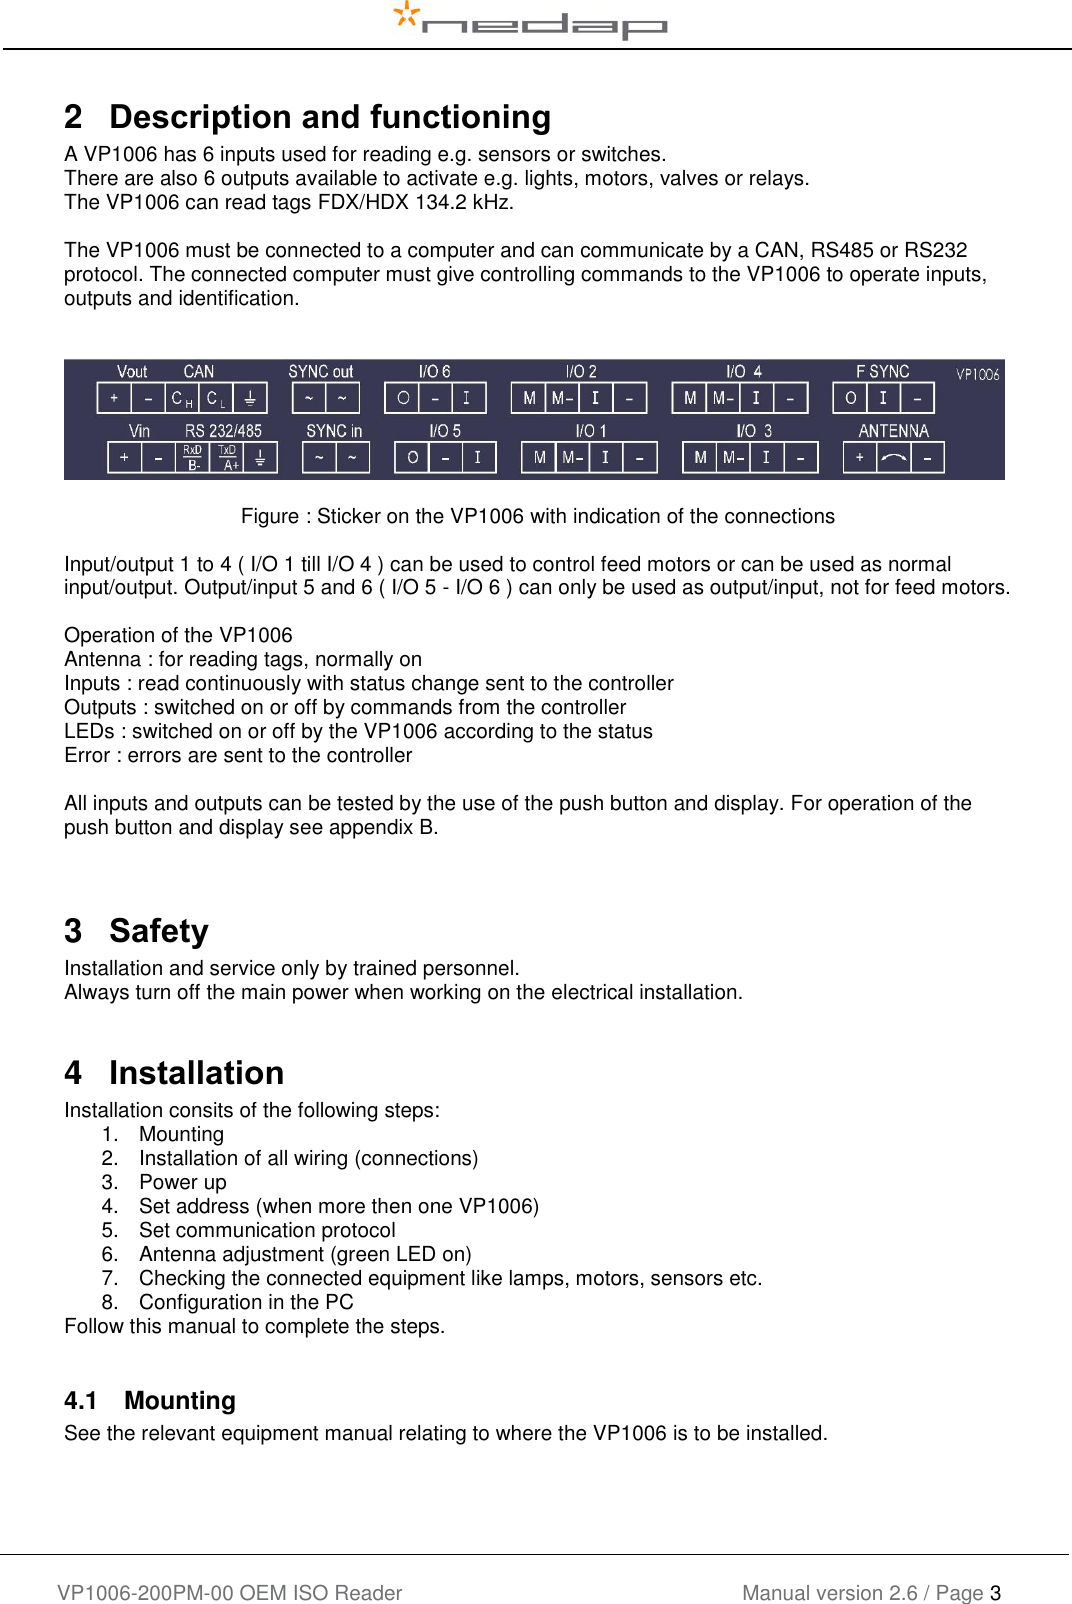    VP1006-200PM-00 OEM ISO Reader Manual version 2.6 / Page 3   2   Description and functioning A VP1006 has 6 inputs used for reading e.g. sensors or switches.   There are also 6 outputs available to activate e.g. lights, motors, valves or relays. The VP1006 can read tags FDX/HDX 134.2 kHz.  The VP1006 must be connected to a computer and can communicate by a CAN, RS485 or RS232 protocol. The connected computer must give controlling commands to the VP1006 to operate inputs, outputs and identification.              Figure : Sticker on the VP1006 with indication of the connections  Input/output 1 to 4 ( I/O 1 till I/O 4 ) can be used to control feed motors or can be used as normal input/output. Output/input 5 and 6 ( I/O 5 - I/O 6 ) can only be used as output/input, not for feed motors.  Operation of the VP1006 Antenna : for reading tags, normally on Inputs : read continuously with status change sent to the controller Outputs : switched on or off by commands from the controller LEDs : switched on or off by the VP1006 according to the status Error : errors are sent to the controller  All inputs and outputs can be tested by the use of the push button and display. For operation of the push button and display see appendix B.   3   Safety Installation and service only by trained personnel. Always turn off the main power when working on the electrical installation.  4  Installation Installation consits of the following steps: 1.  Mounting 2.  Installation of all wiring (connections) 3.  Power up 4.  Set address (when more then one VP1006) 5.  Set communication protocol 6.  Antenna adjustment (green LED on) 7.  Checking the connected equipment like lamps, motors, sensors etc. 8.  Configuration in the PC Follow this manual to complete the steps.  4.1  Mounting See the relevant equipment manual relating to where the VP1006 is to be installed.      